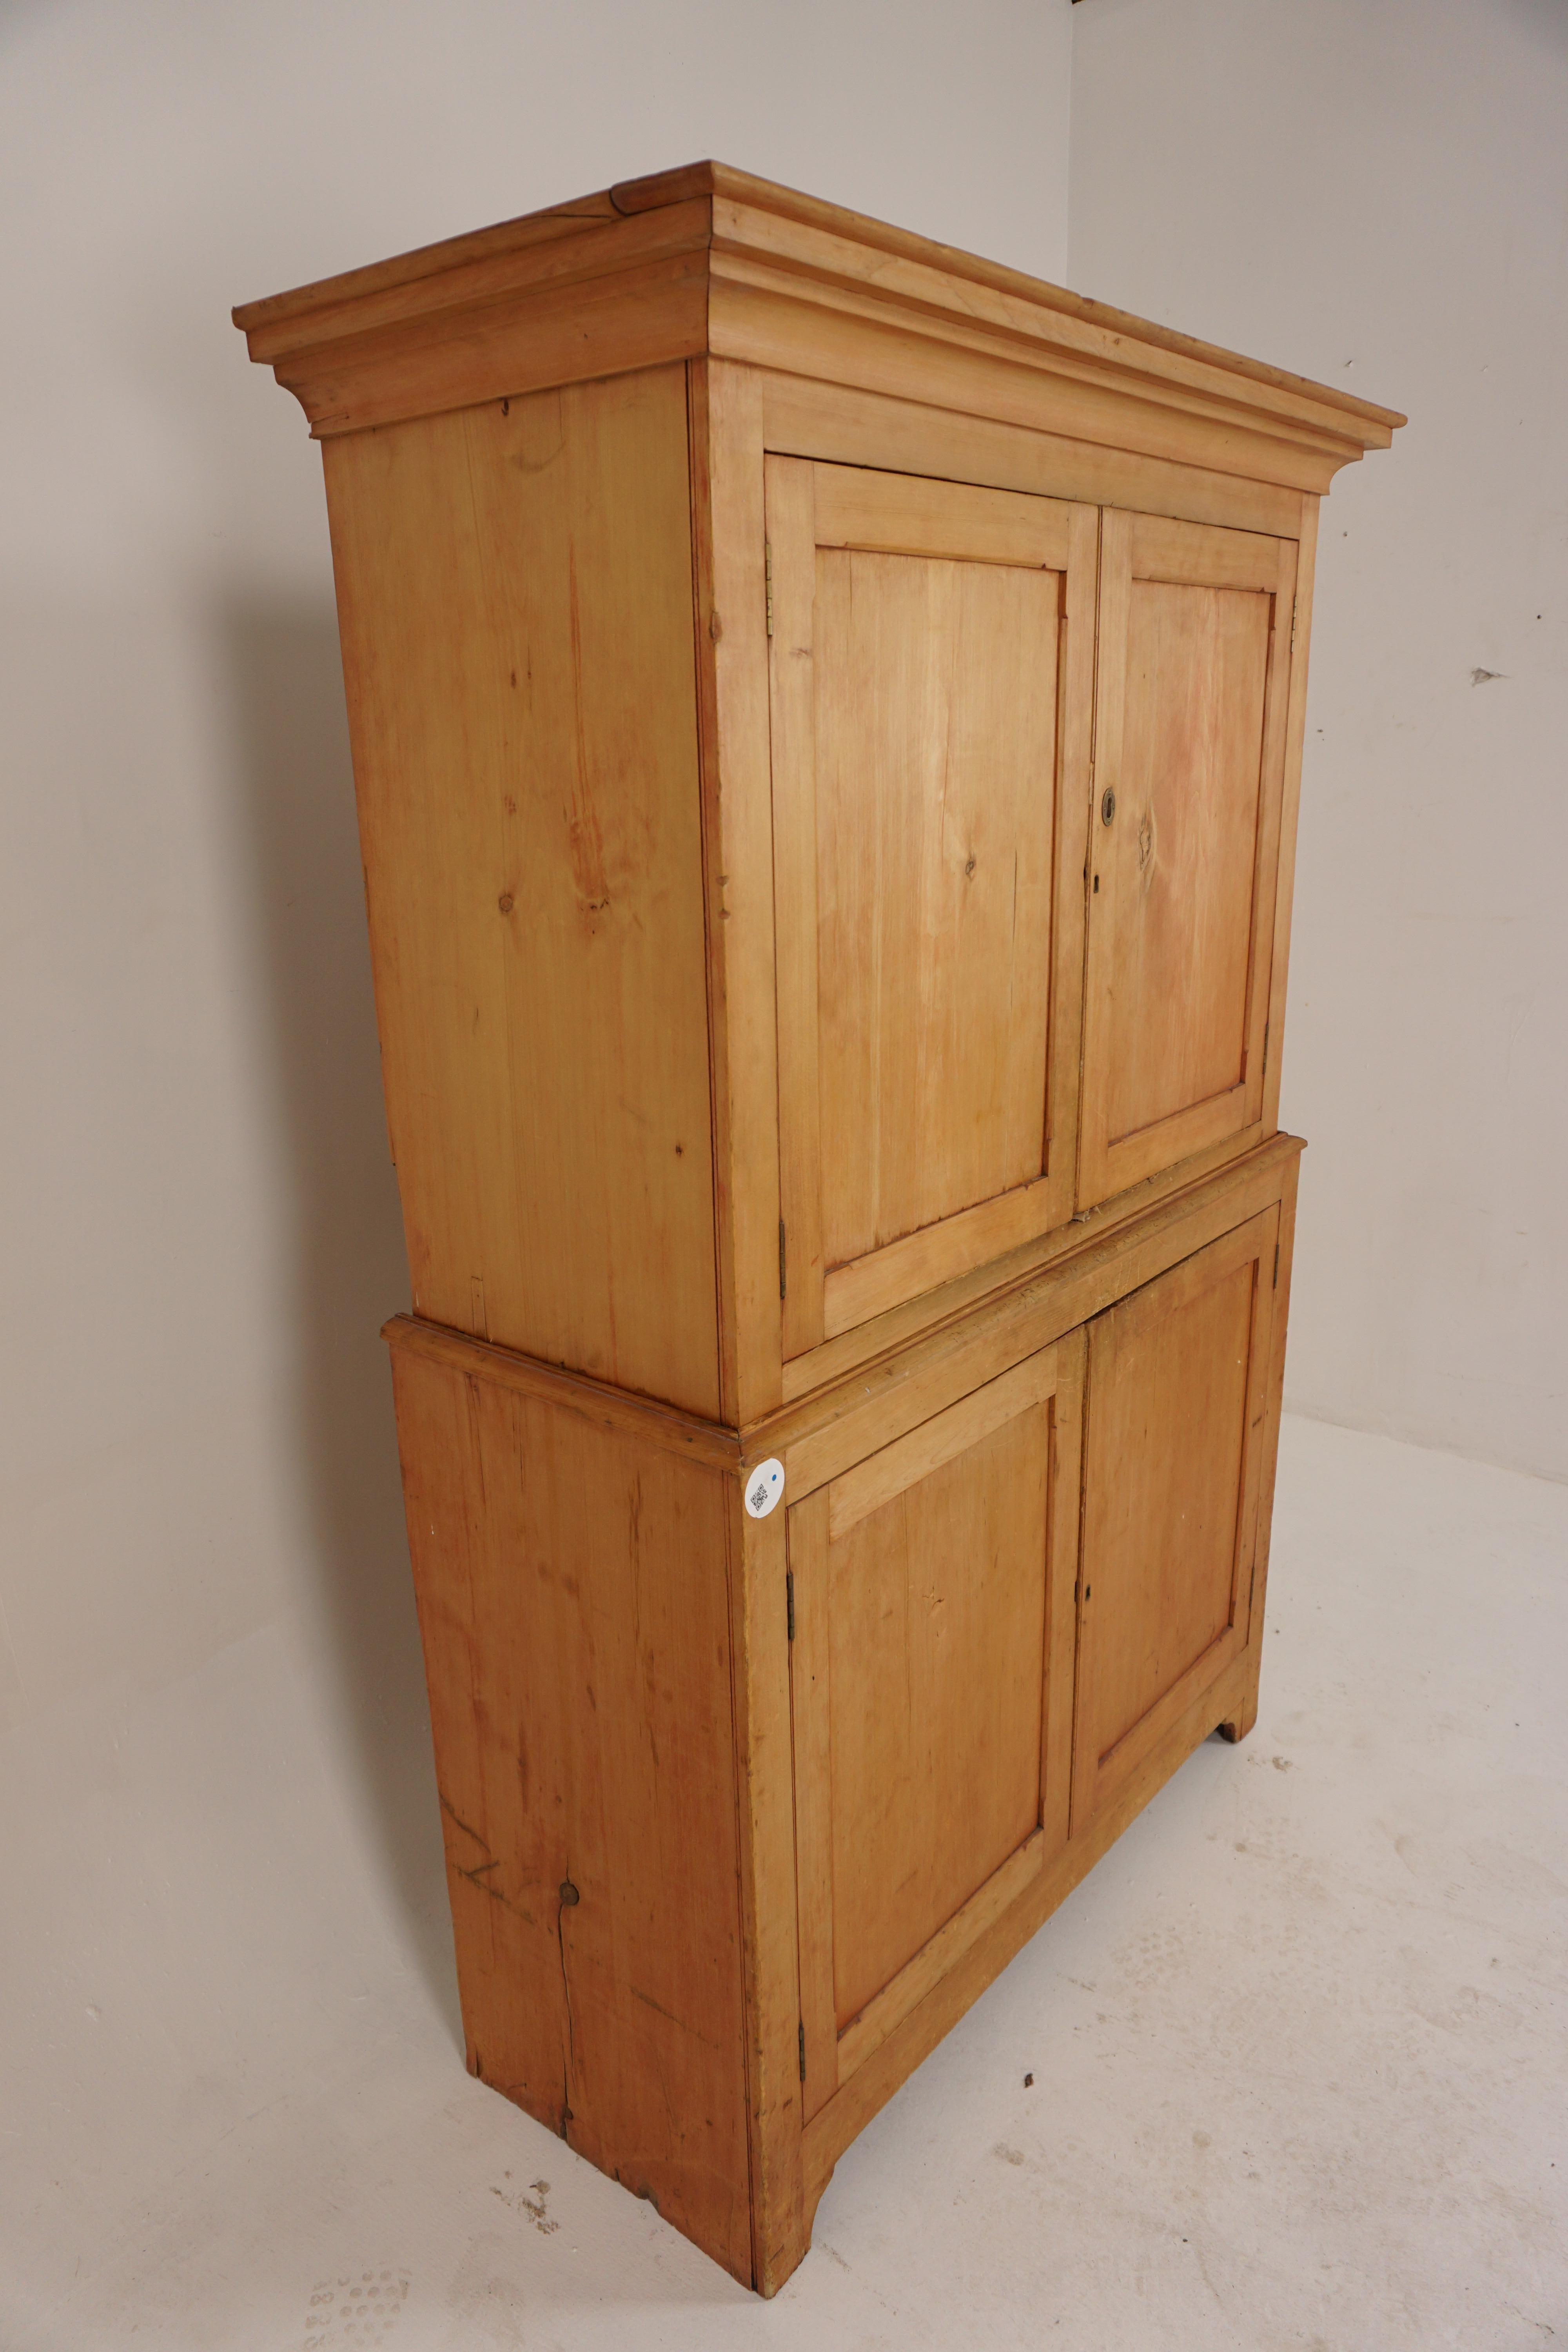 Antique Pine 4 door cupboard, cabinet farmhouse, housekeeper’s cupboard, Scotland 1880, H908

Scotland 1880
Solid Pine
Original Finish
Deep moulded cornice on top
Pair of panel doors open to reveal a spacious storage area with two pine